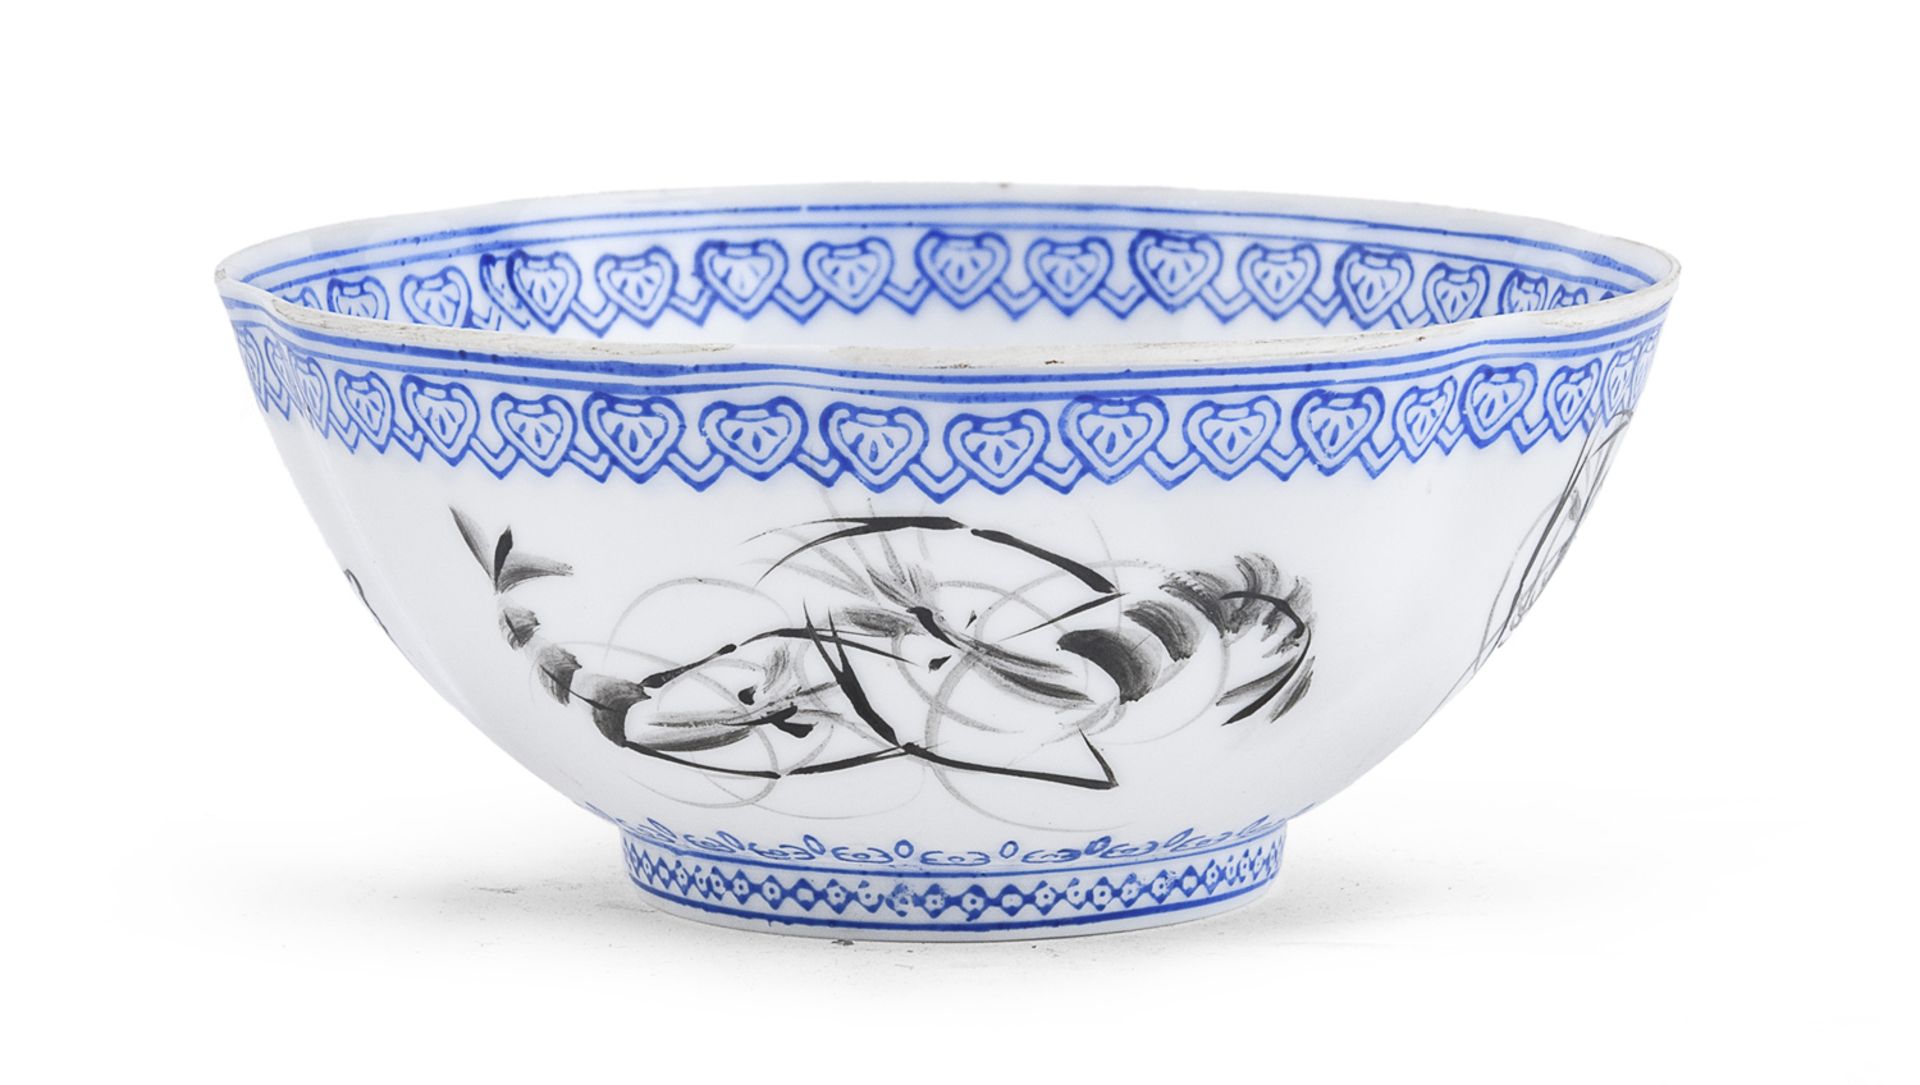 A CHINESE PORCELAIN BOWL 20TH CENTURY.